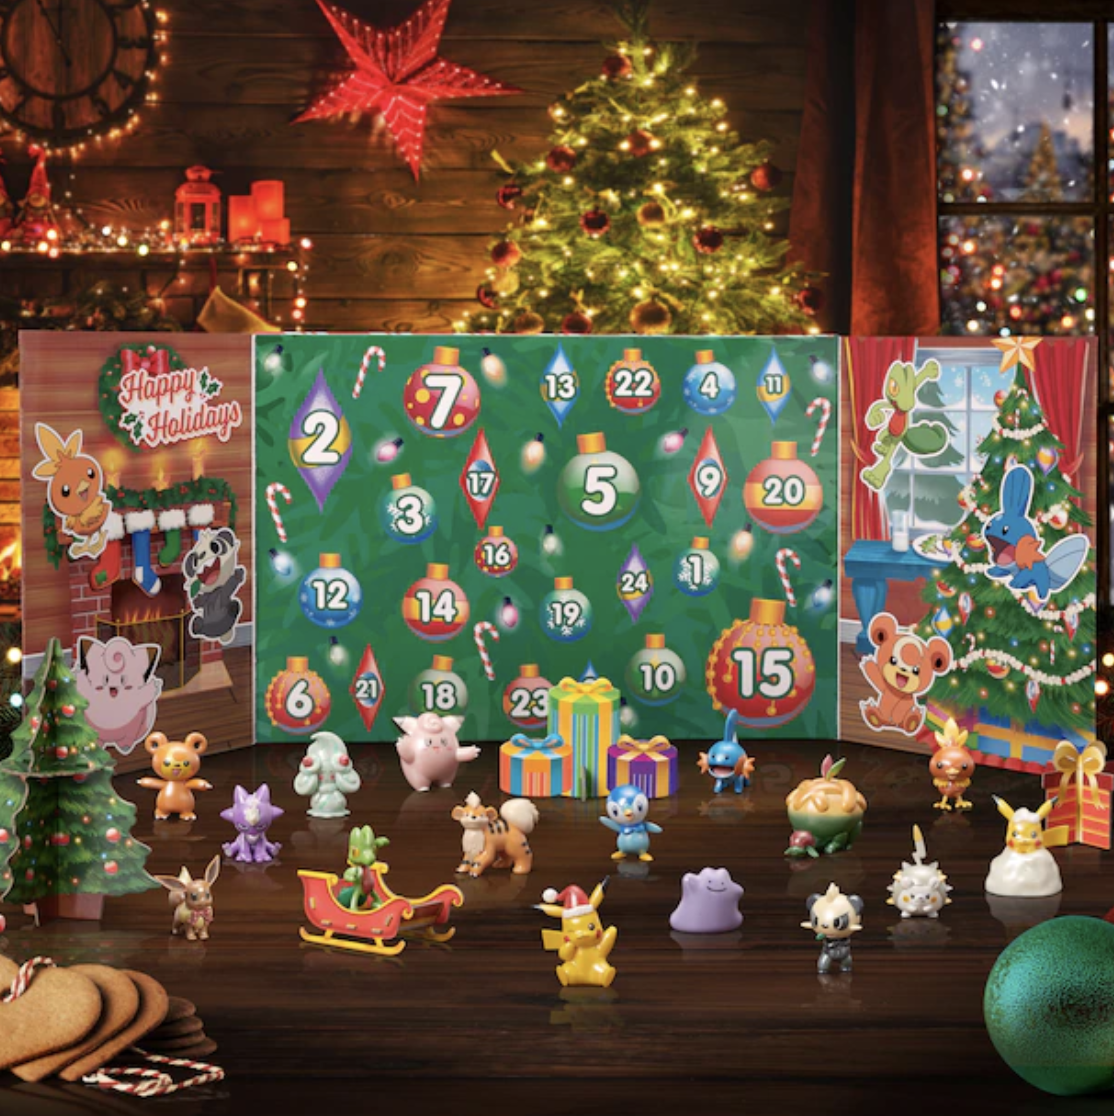 the advent calendar open with the figurines in front of it